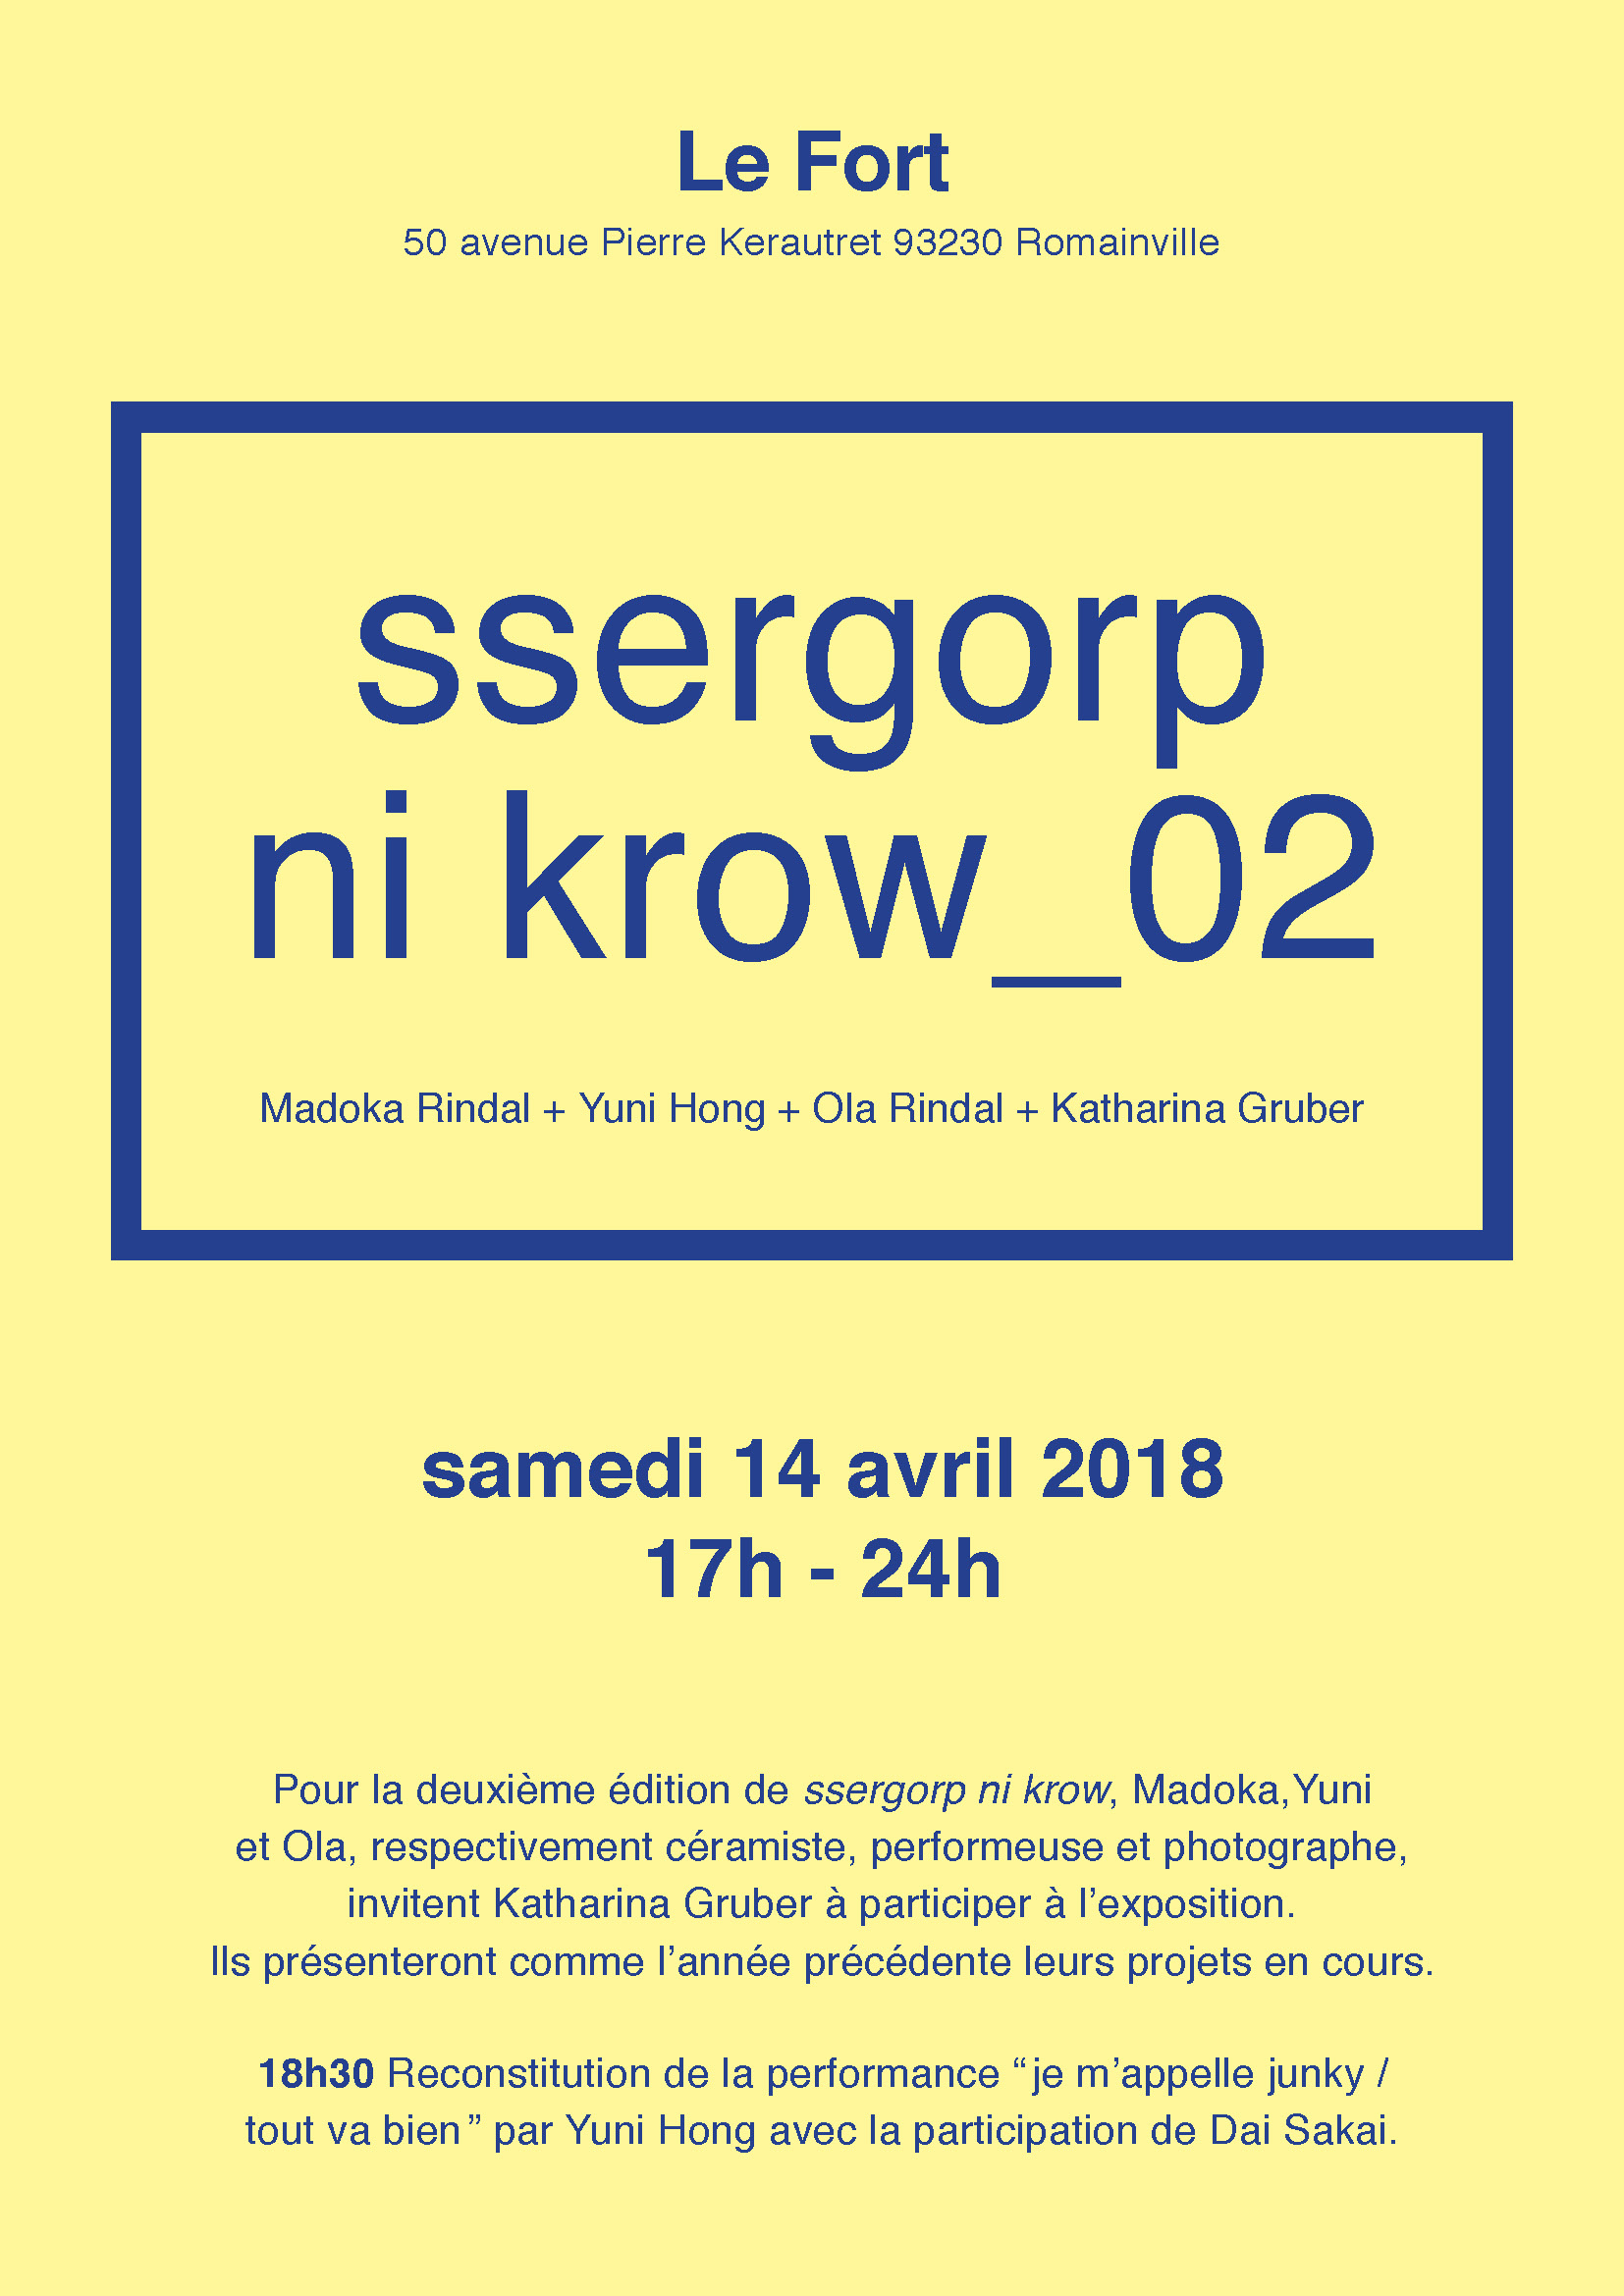   For the second édition of 'ssergorp ni krow' Madoka Rindal (ceramist), Ola Rindal (photographer)&nbsp;and Yuni Hong (performance artist)&nbsp;presented each other's work during an open vernissage. Katharina Gruber was invited to participate with he